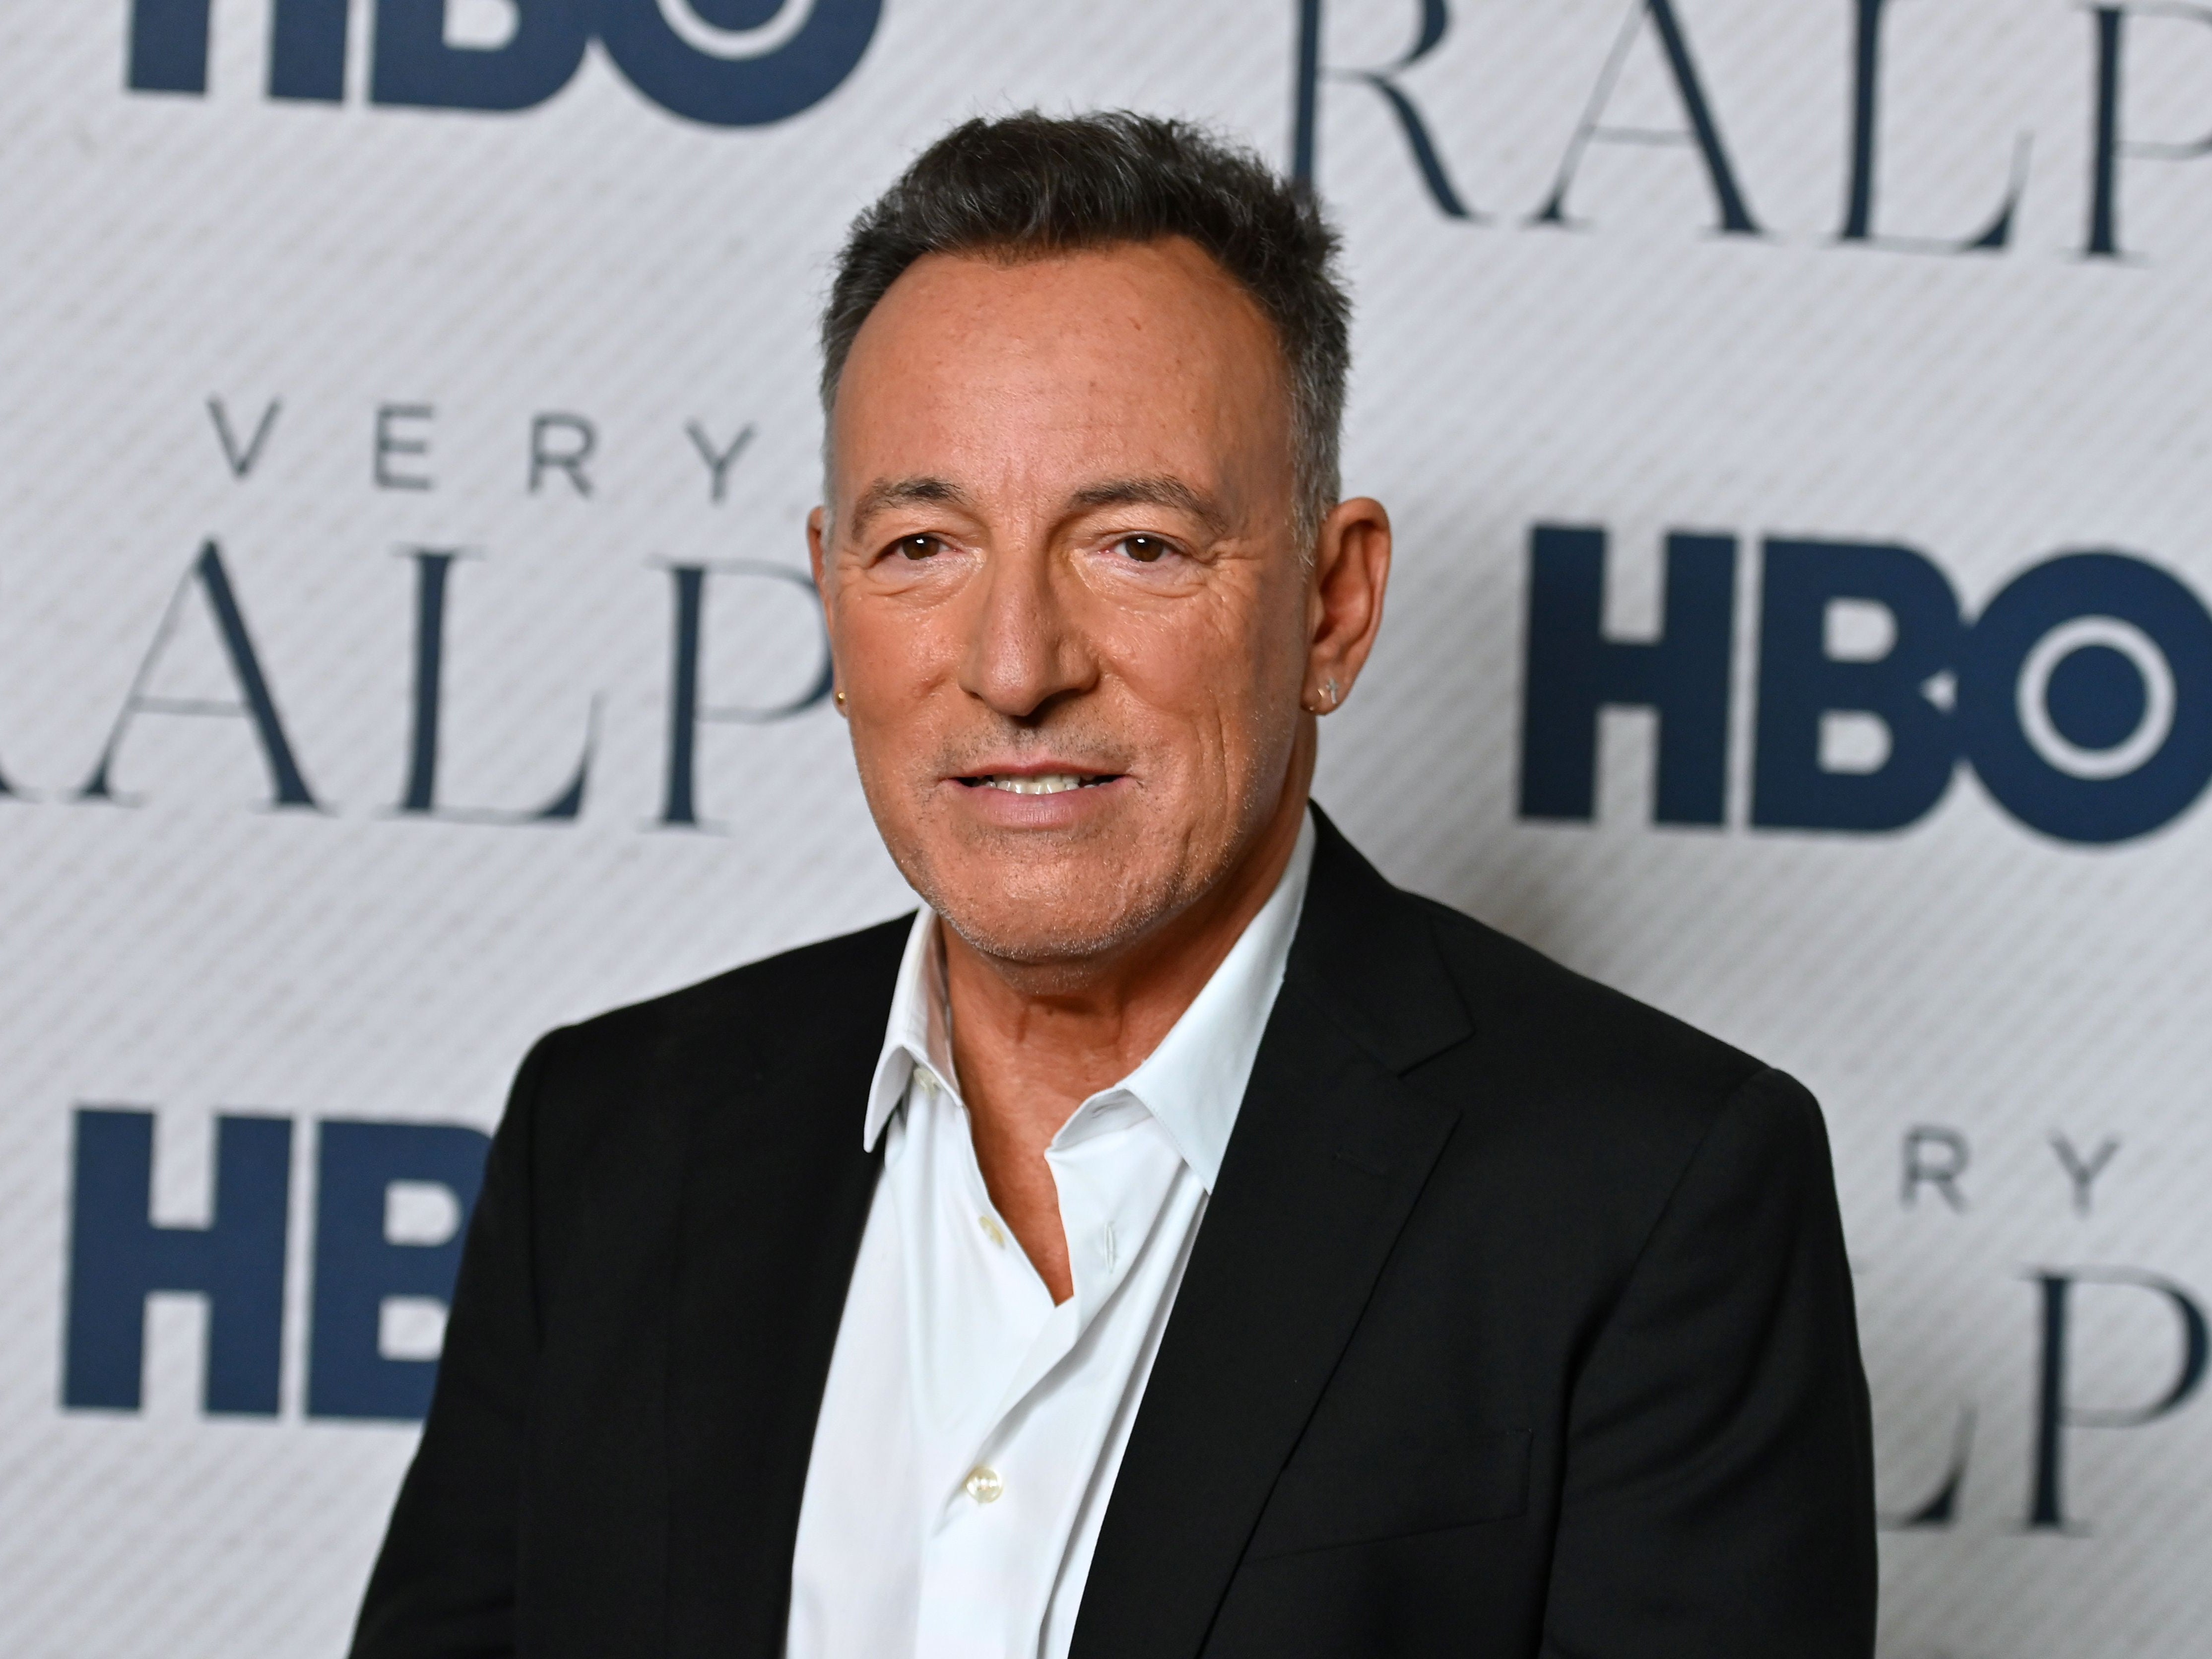 Bruce Springsteen attends the world premiere of HBO’s documentary ‘Very Ralph’ at the Metropolitan Museum of Art on 23 October 2019 in New York City